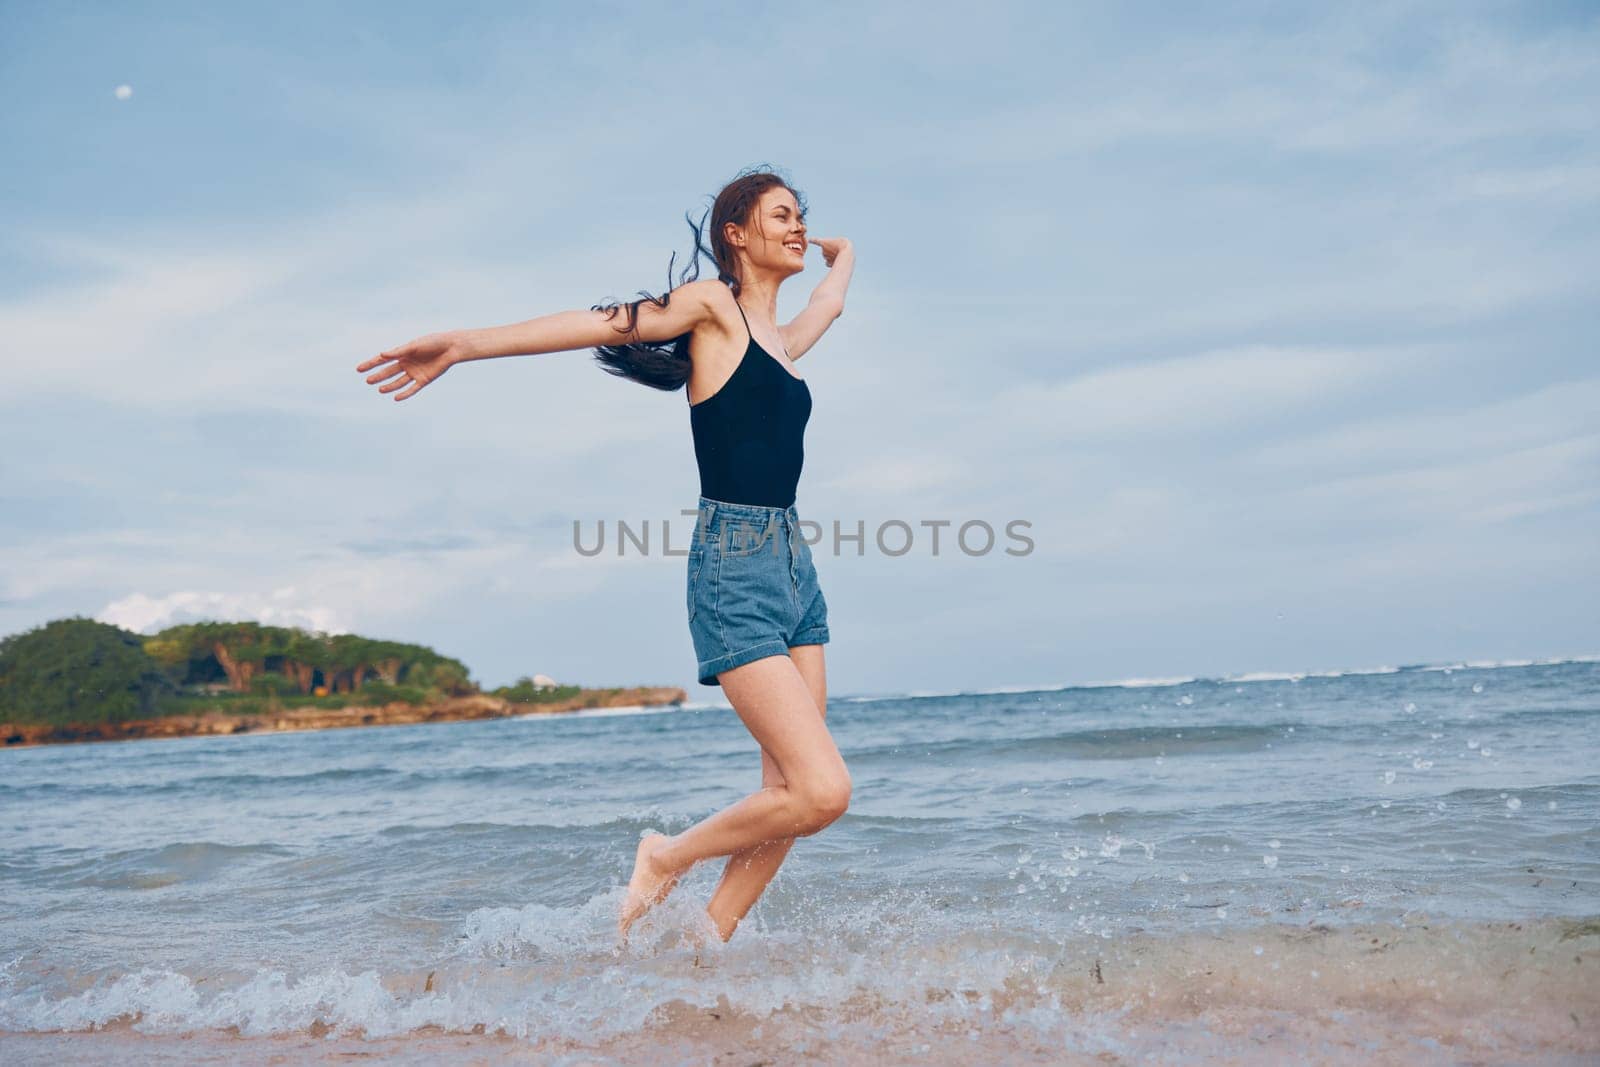 woman walking sea summer shore lifestyle sun sunset beautiful happiness hair carefree body beach sexy smile travel young long smiling running happy